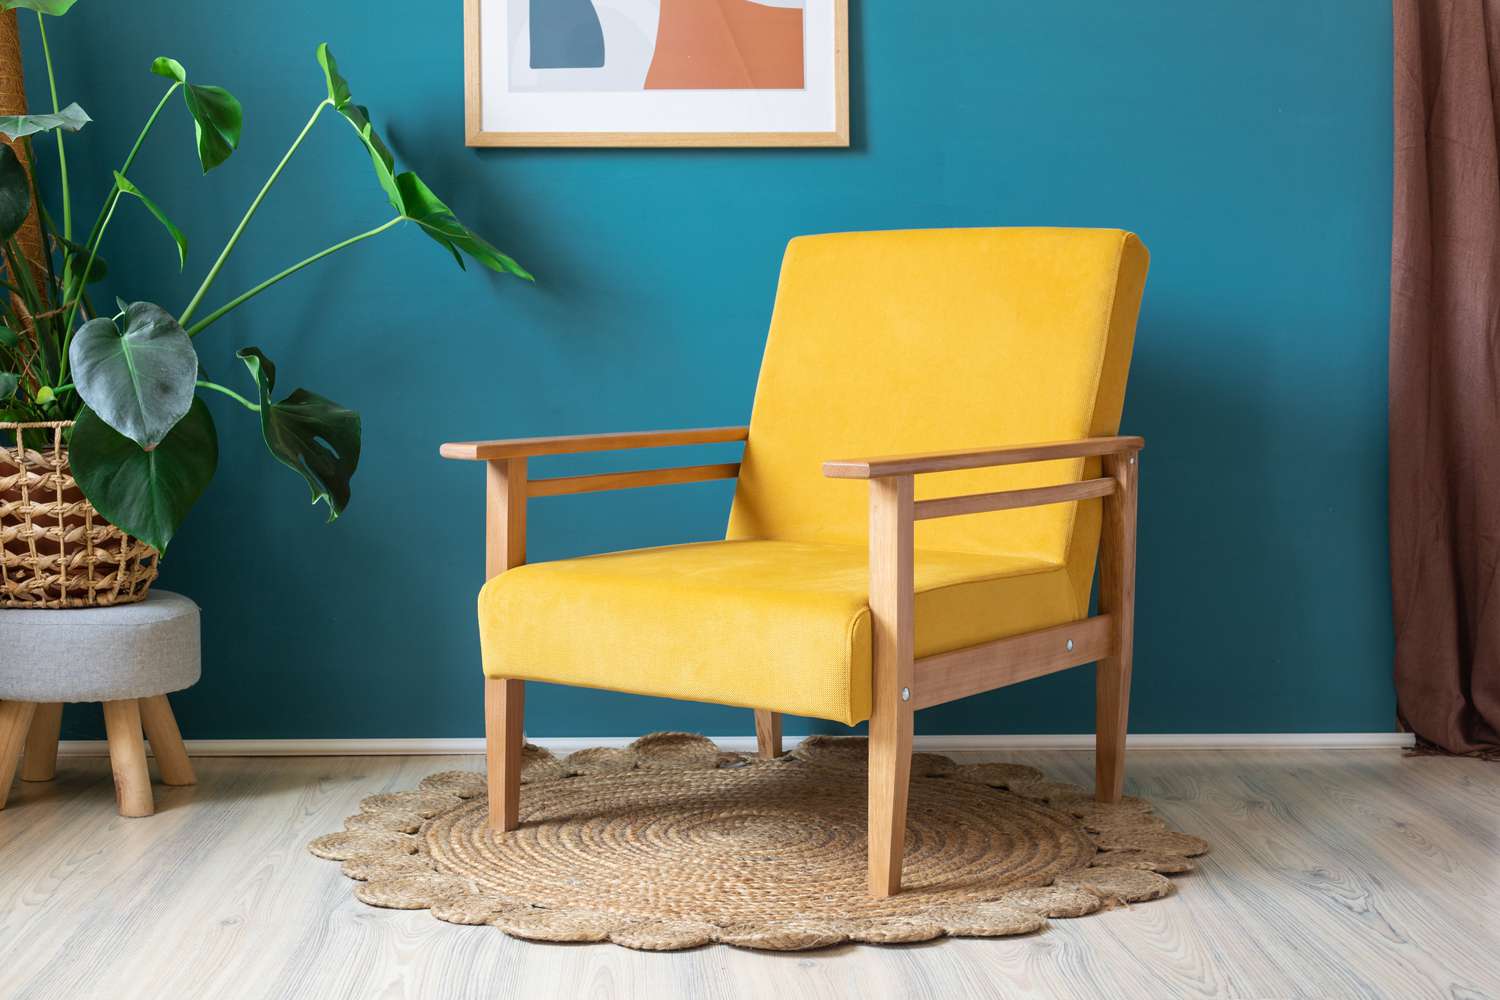 DIY Upholstery: A Step-by-Step Guide